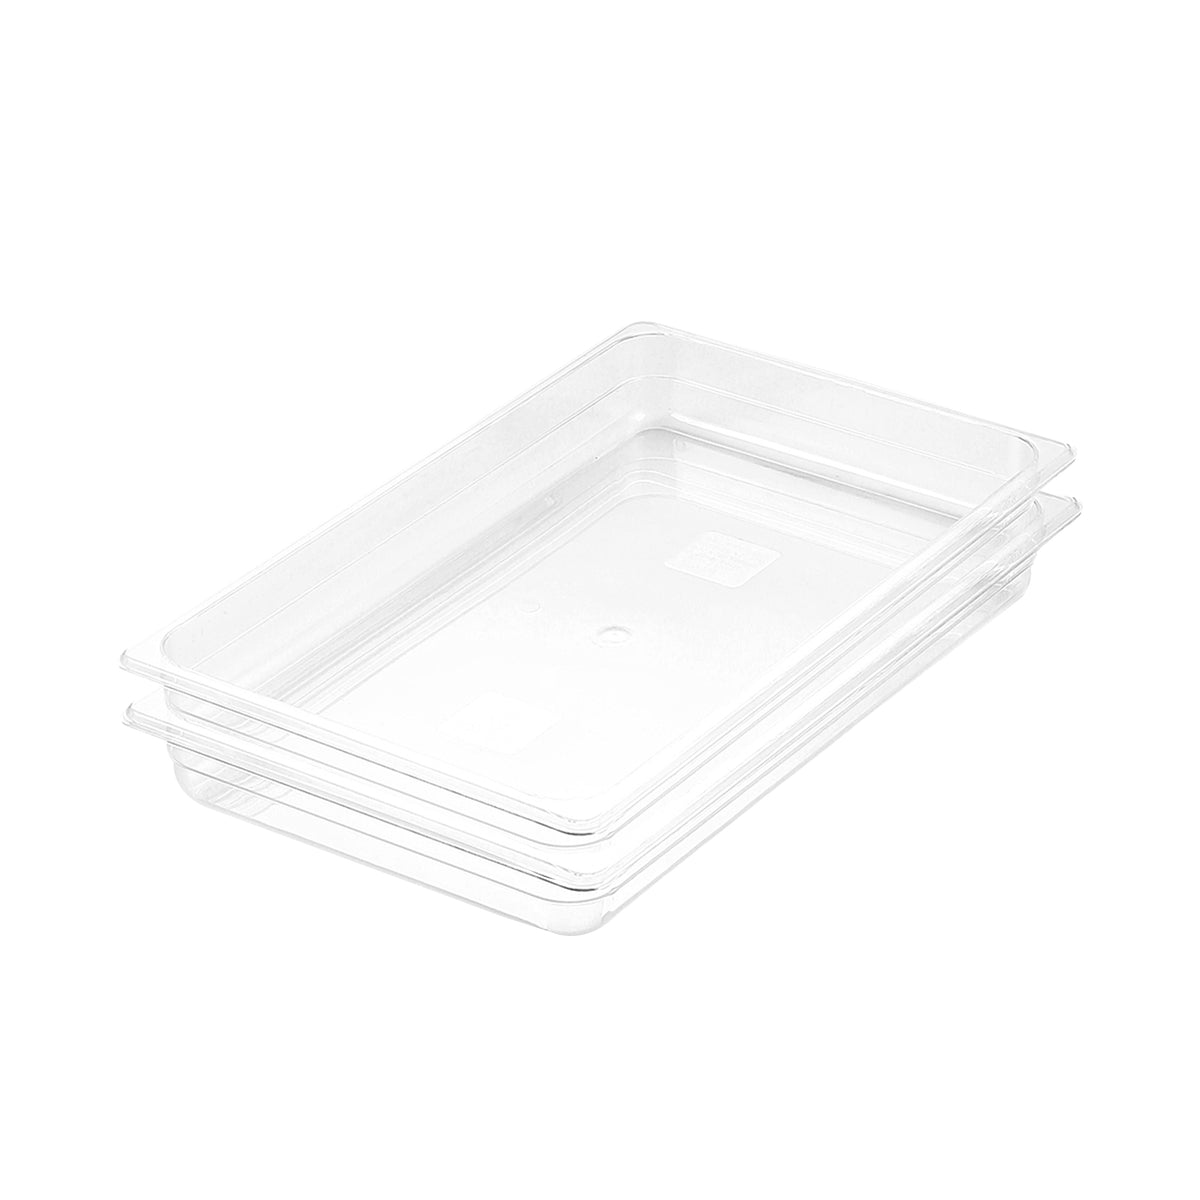 SOGA 65mm Clear Gastronorm GN Pan 1/1 Food Tray Storage Bundle of 2